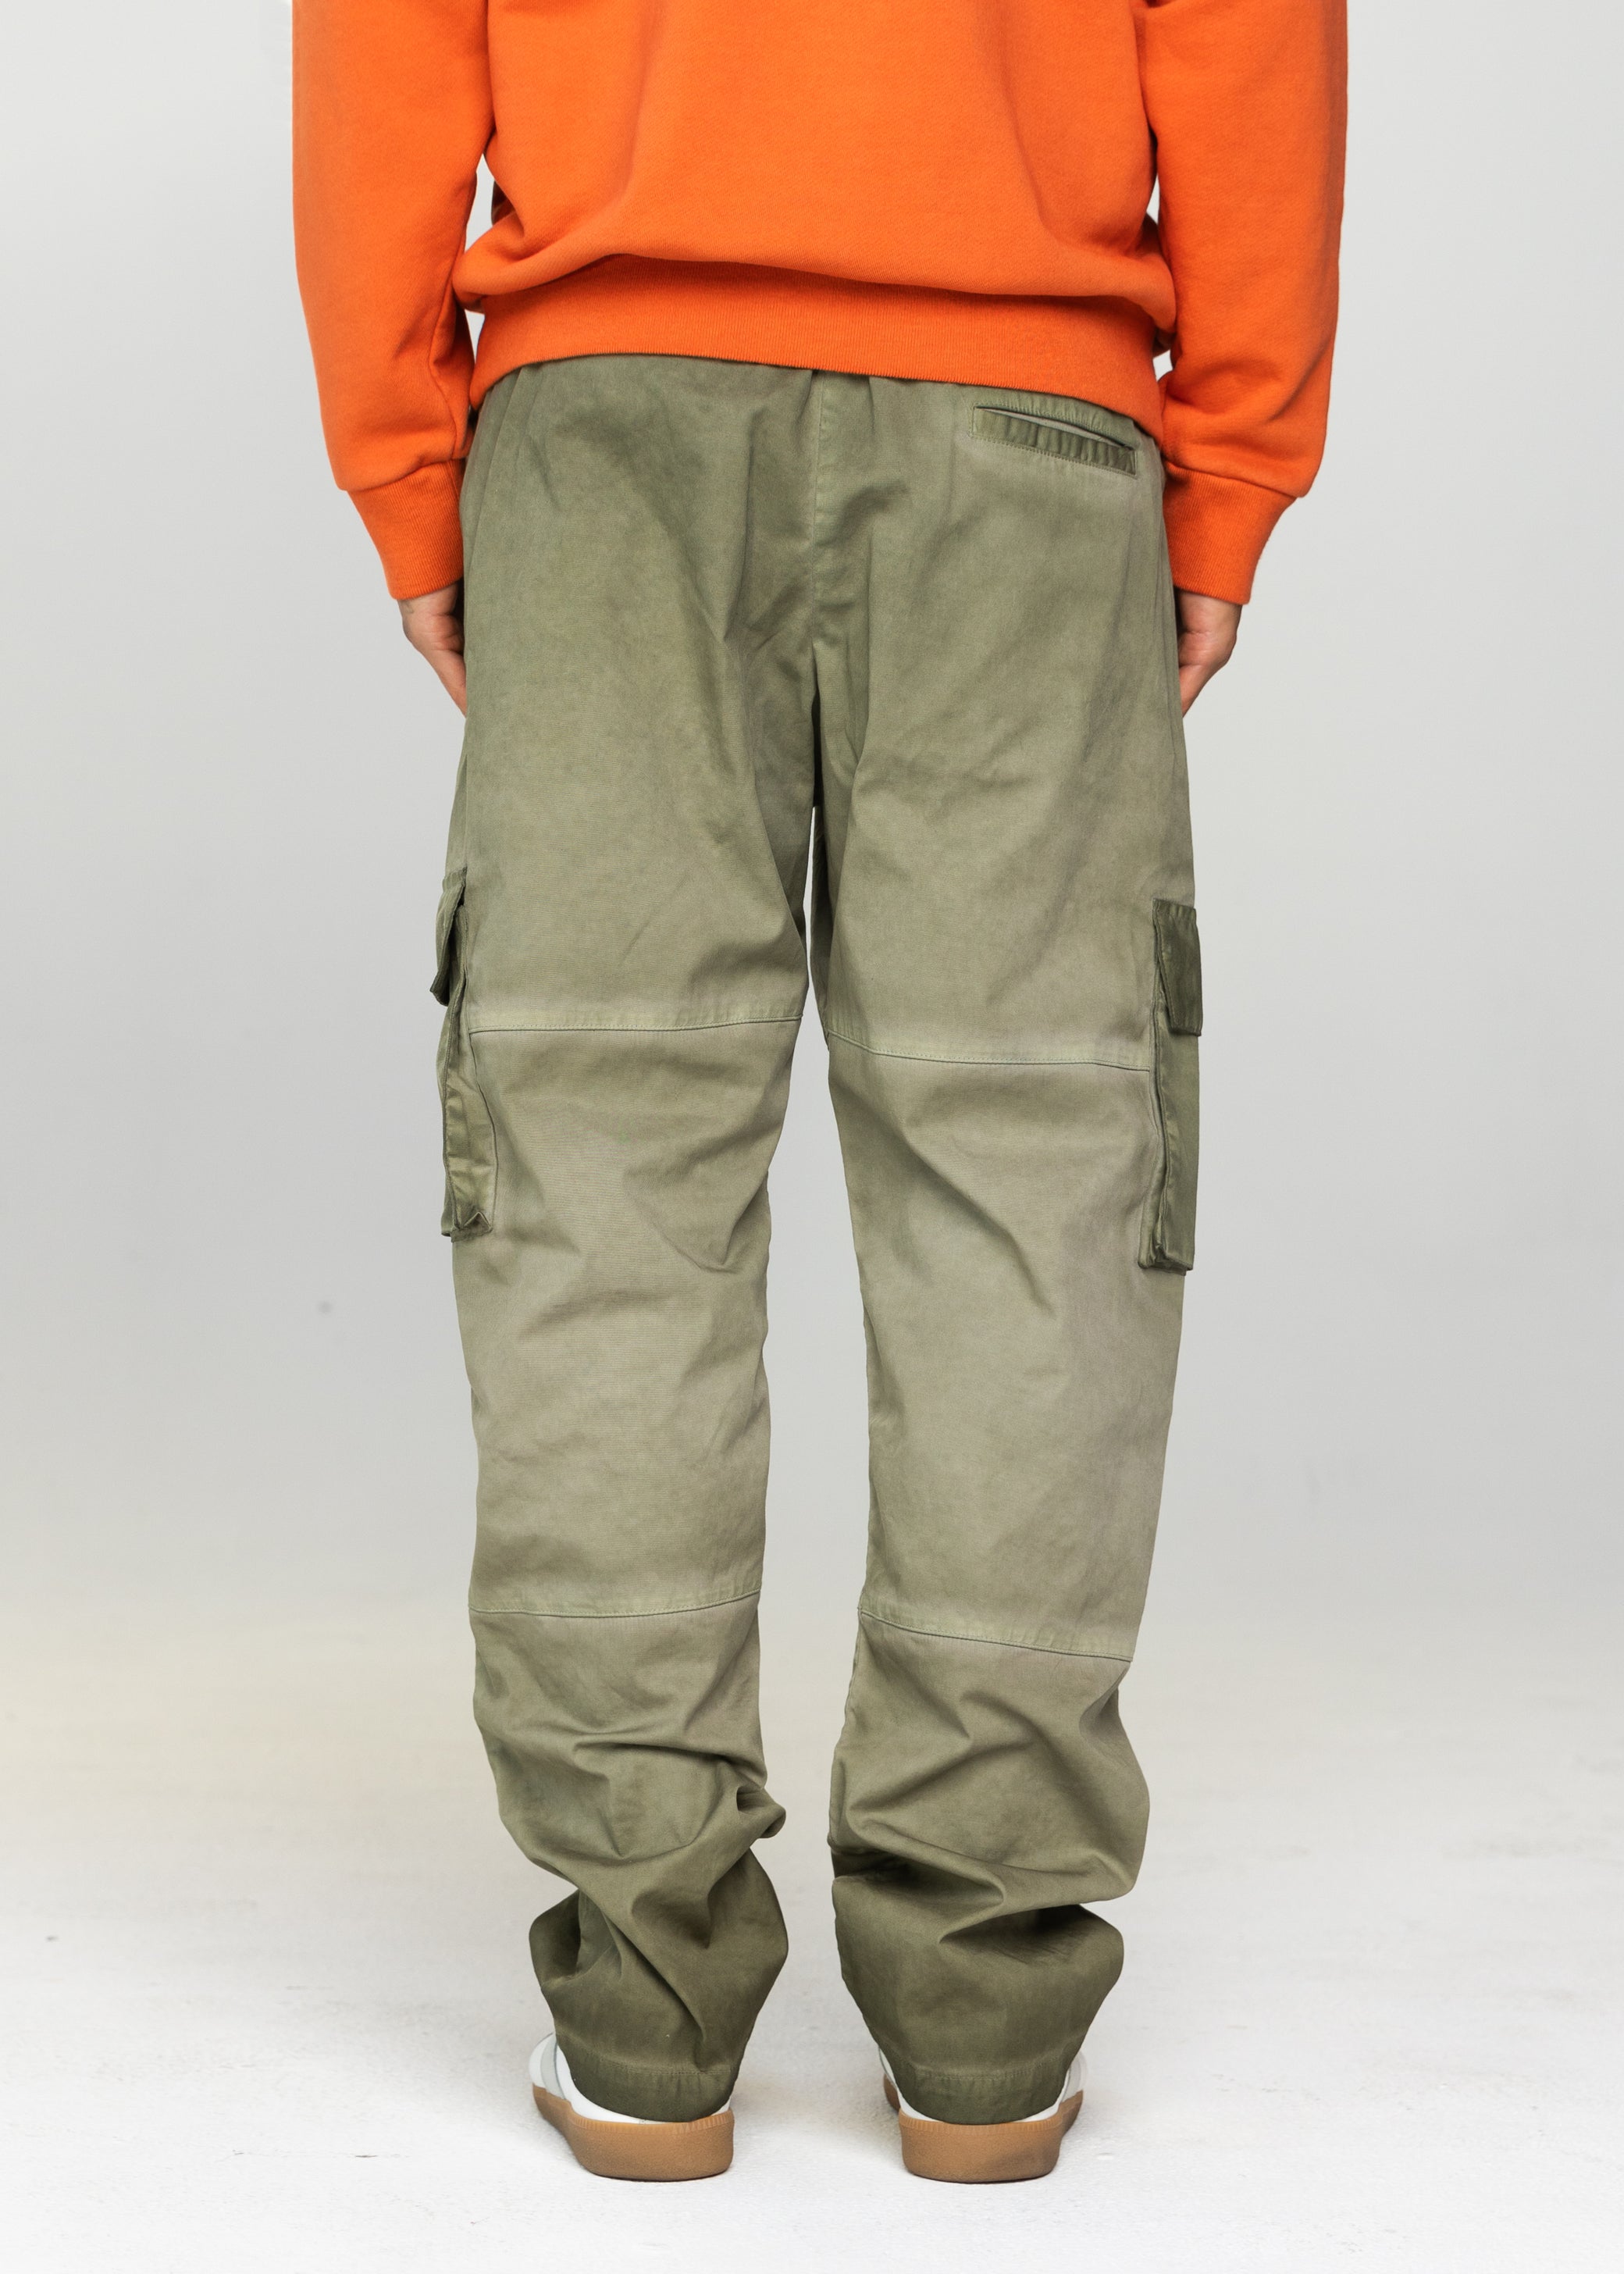 Criss Cross Waistband Cargo Pocket Pants in Olive